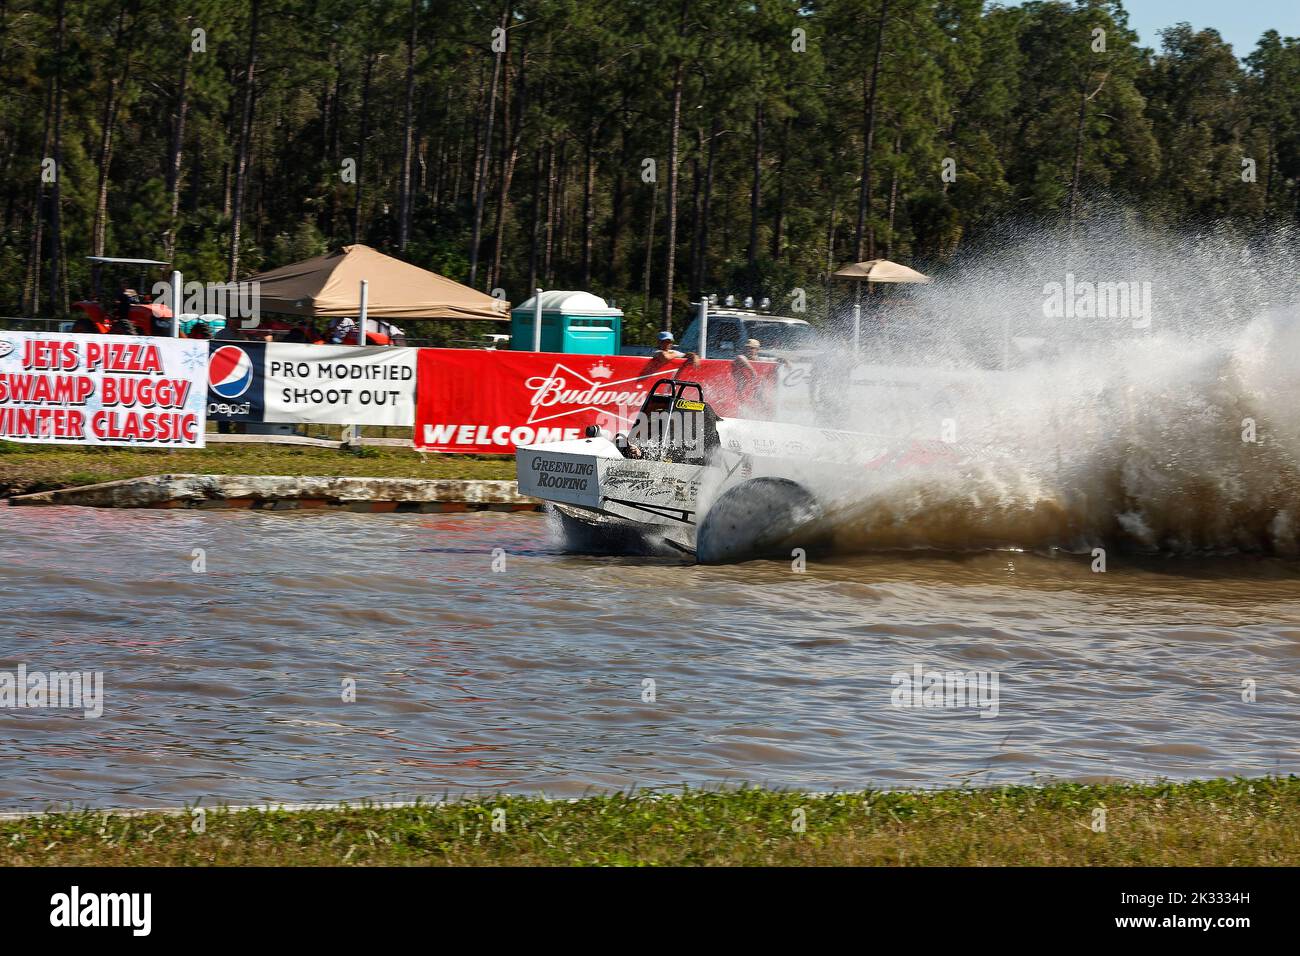 swamp buggy racing, very large water spray, action, advertising banners, spectators, contest, motion, sport, Florida Sports Park, Naples, FL Stock Photo